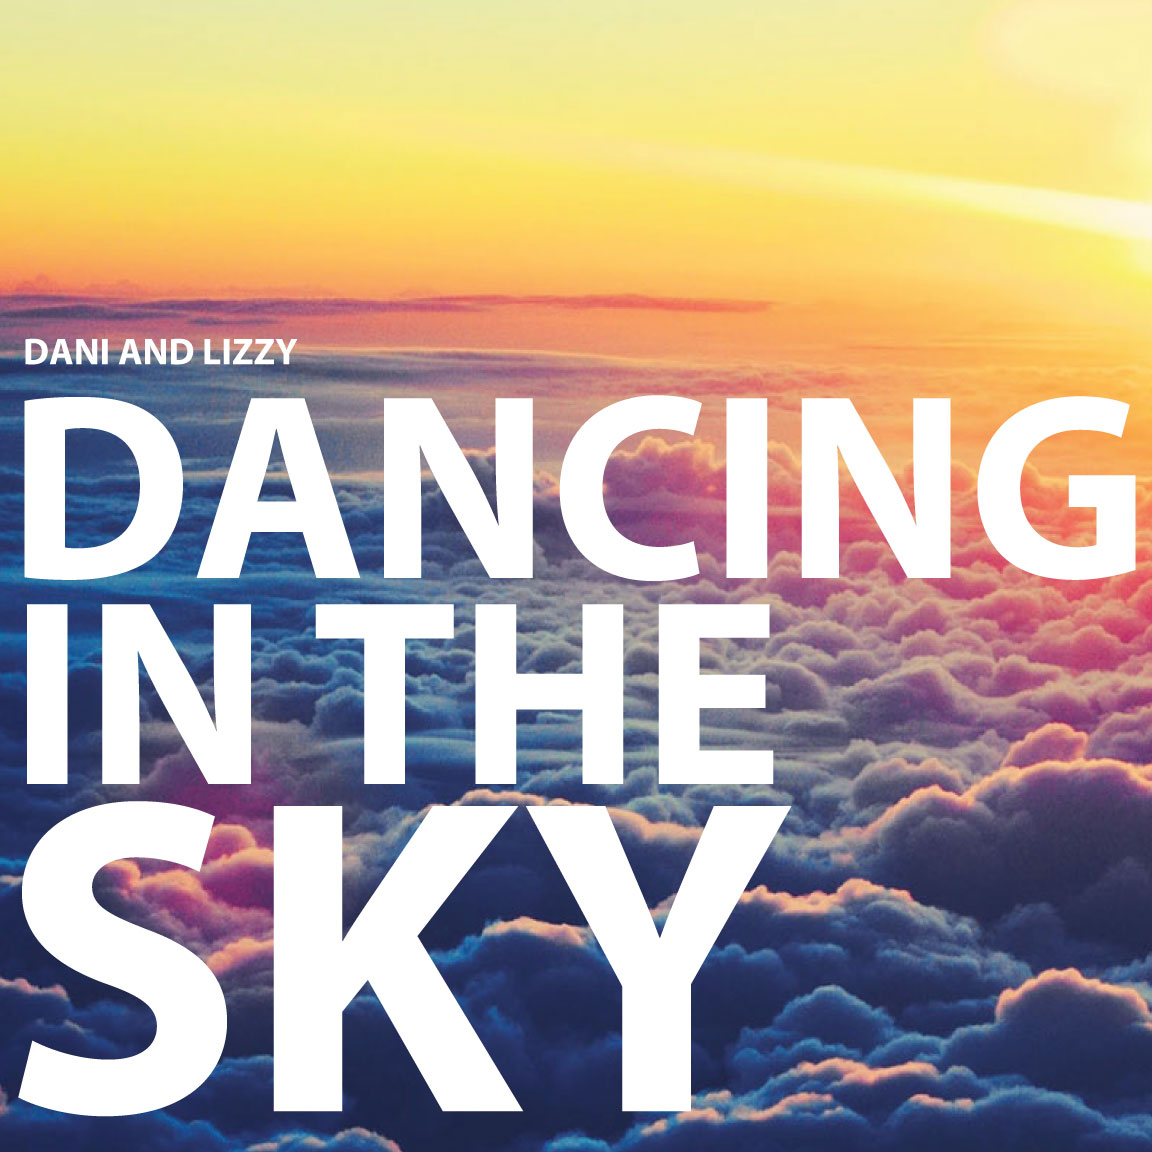 dani and lizzy dancing in the sky mp3 free download